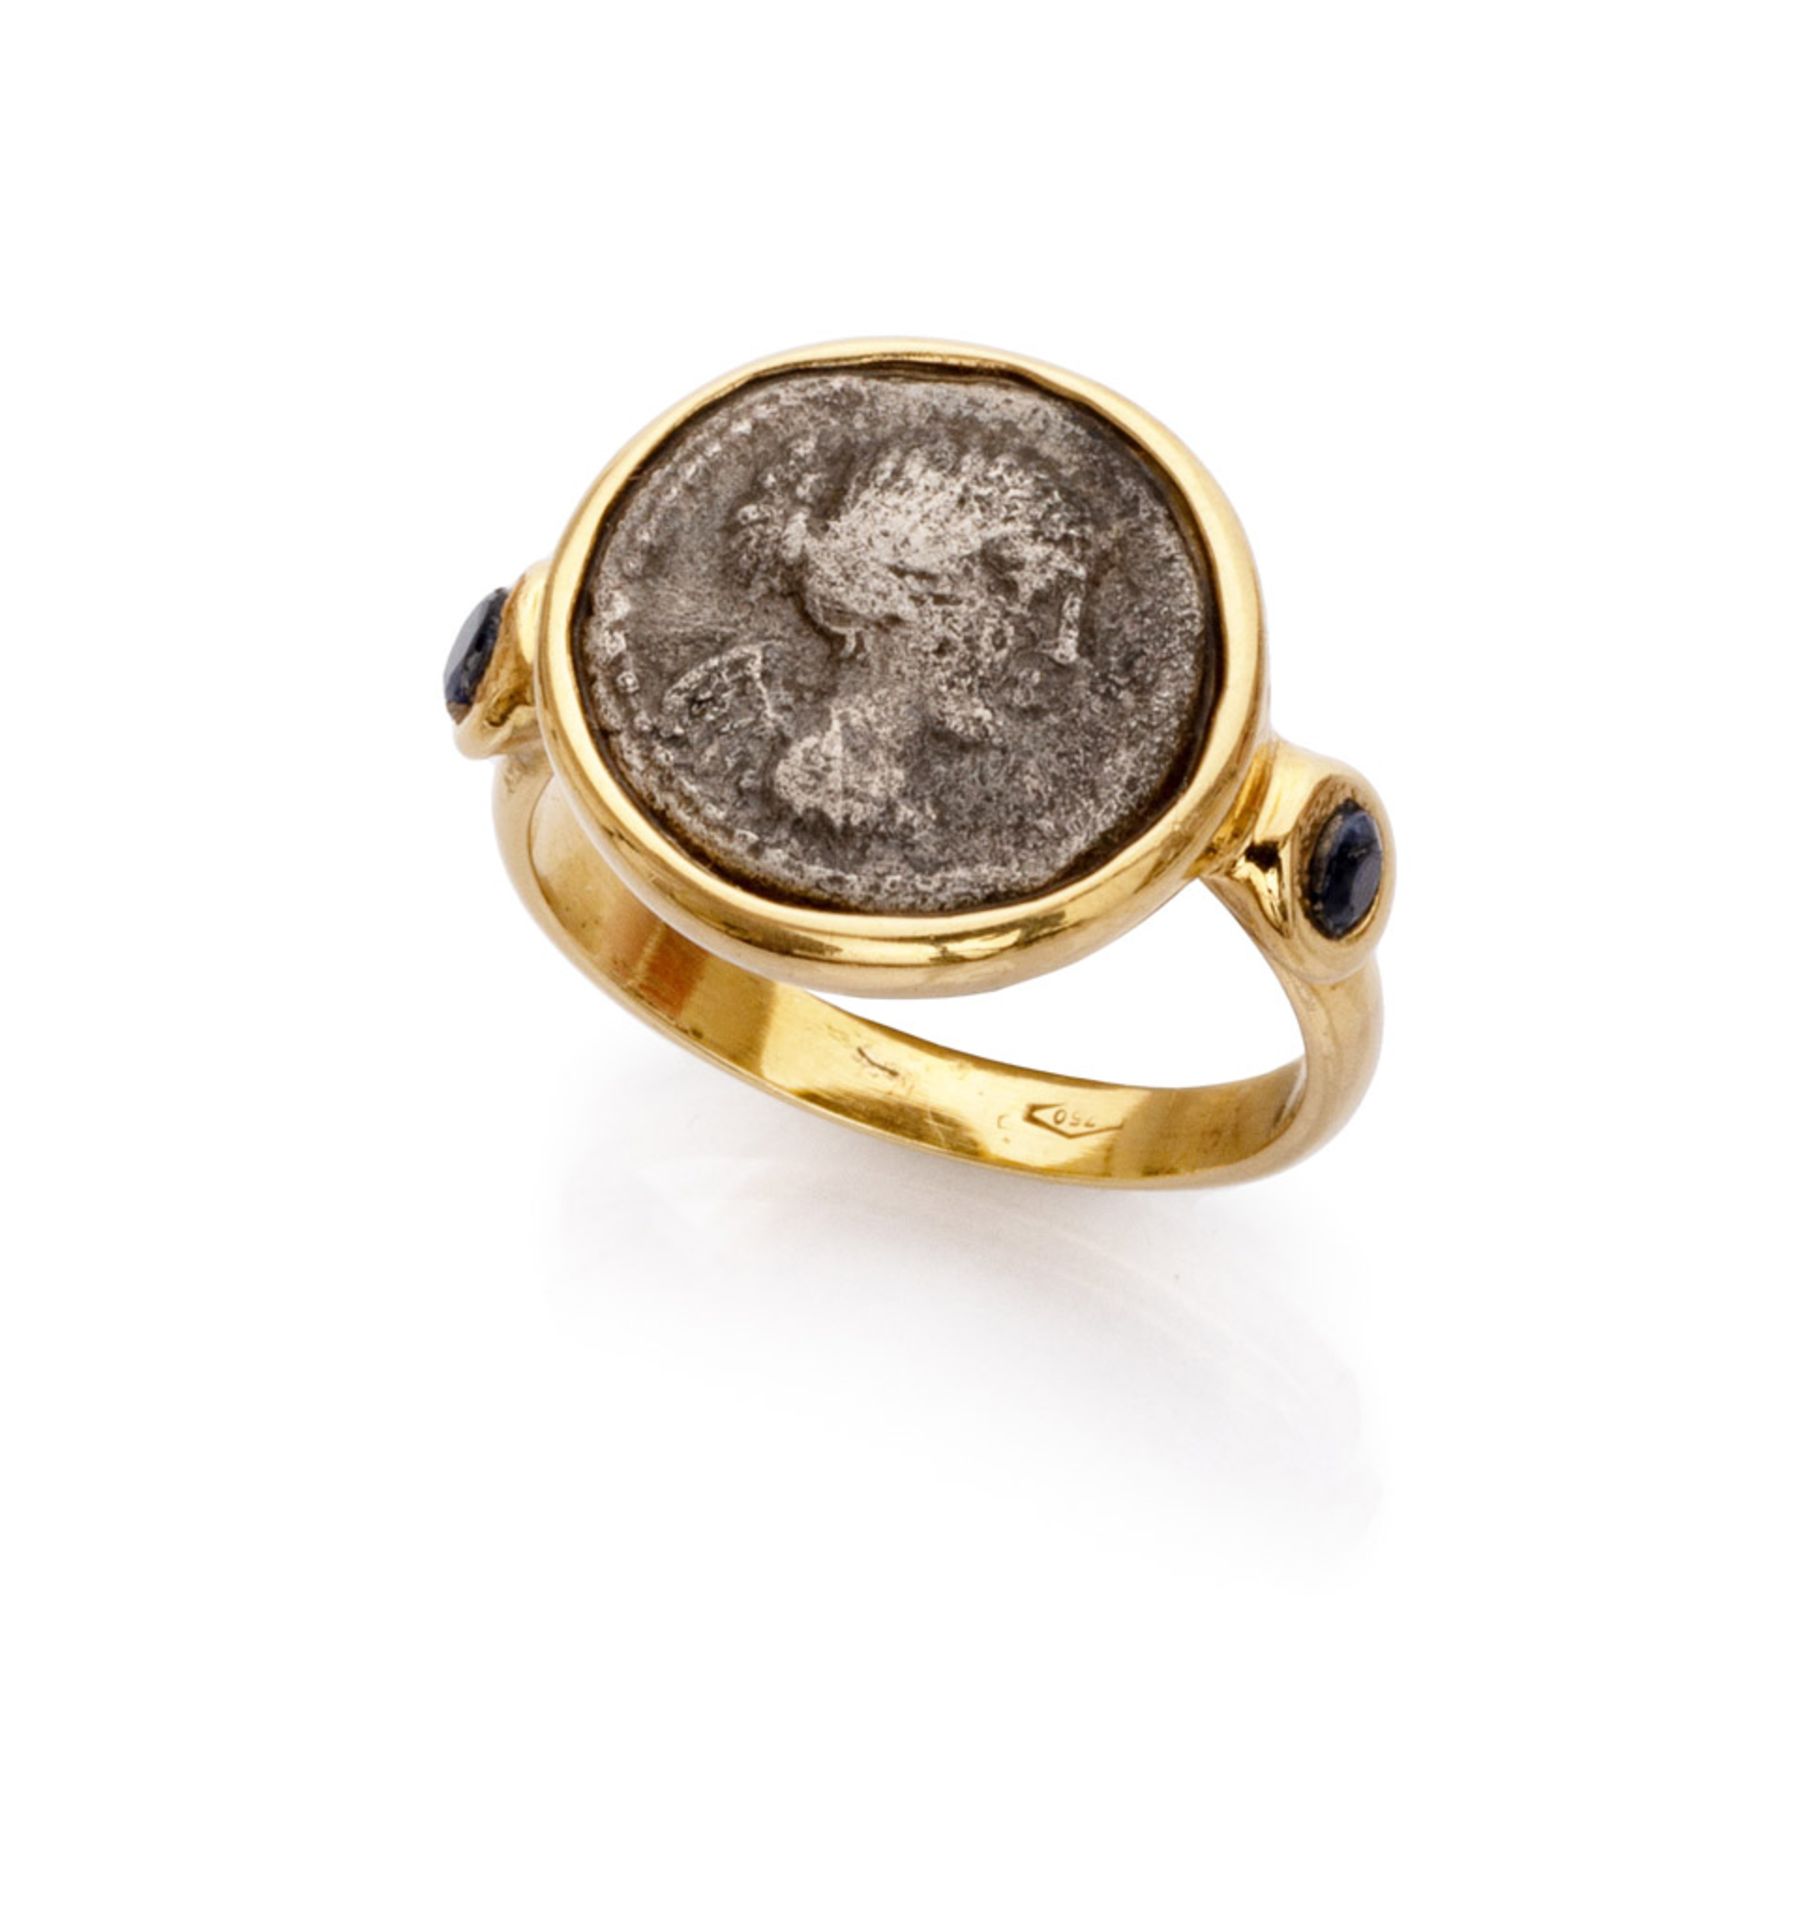 RING with mount in yellow gold 18 kts., with central antique coin and side sapphires. Sapphires